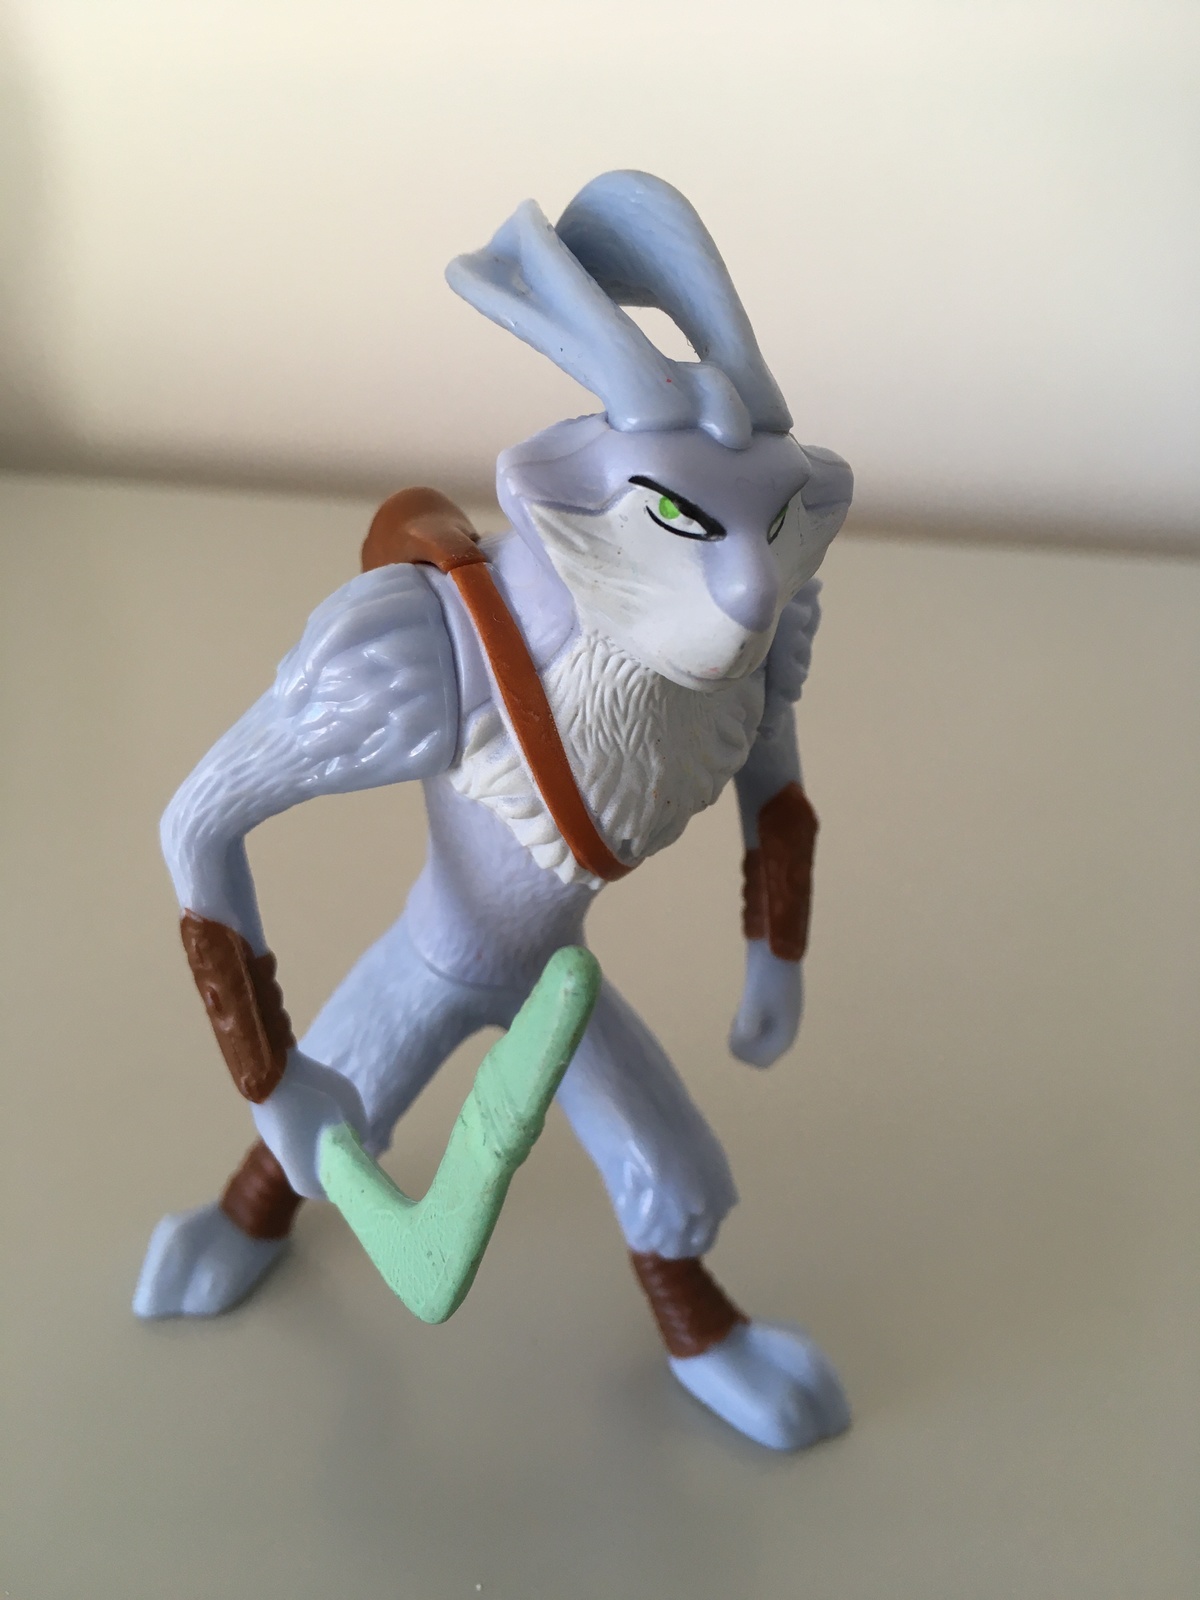 Primary image for MCDONALD'S EASTER BUNNY - RISE OF THE GUARDIANS FIGURE (2012)